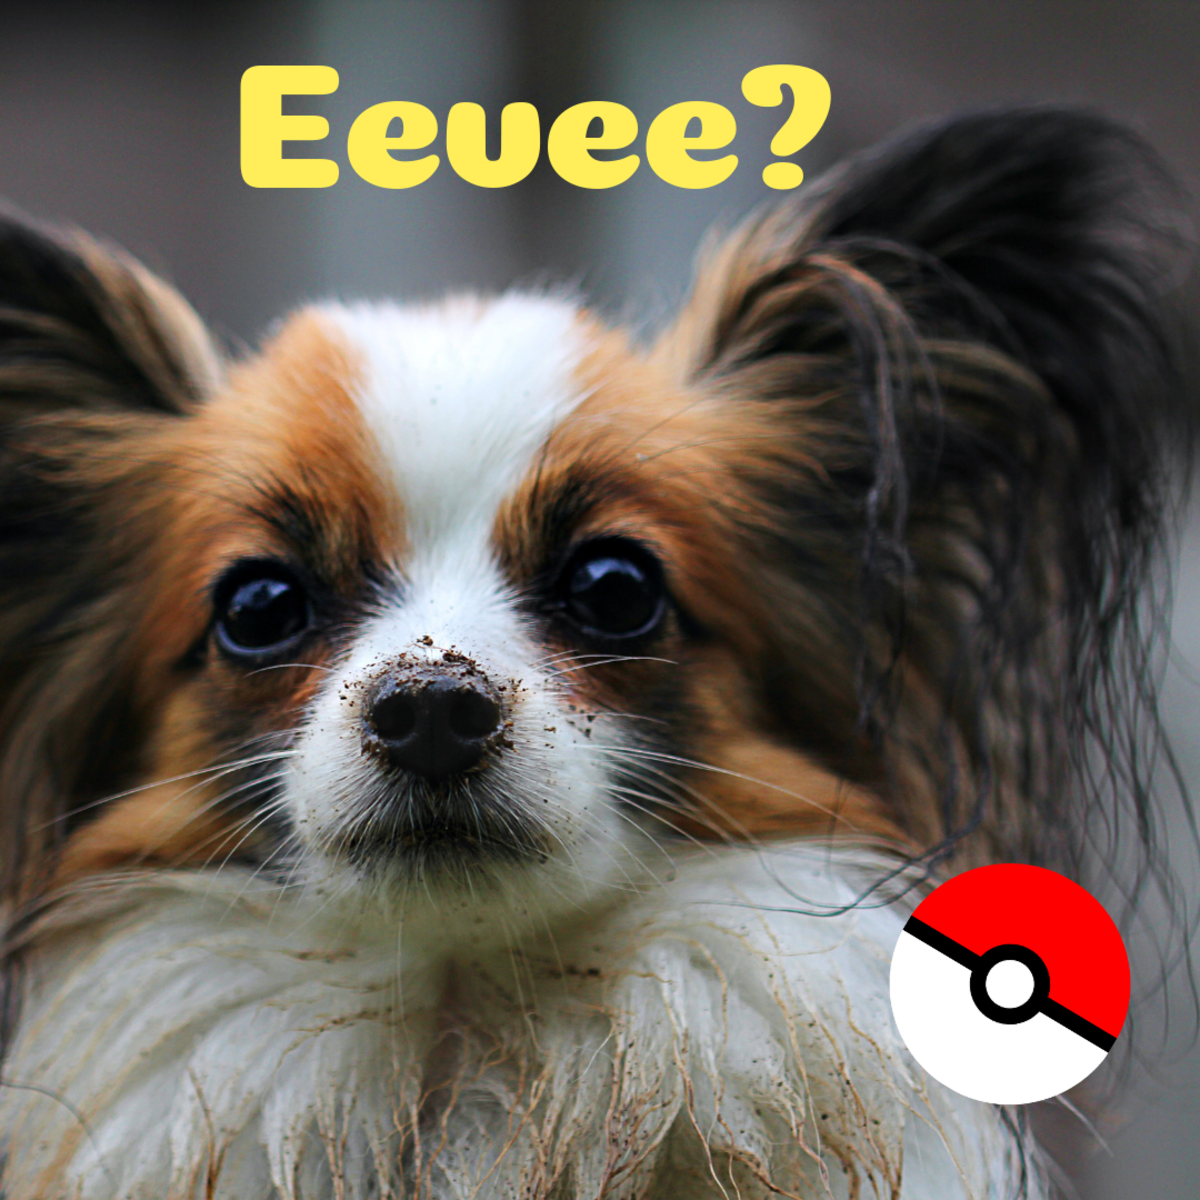 Is she an Eevee or an Evie?